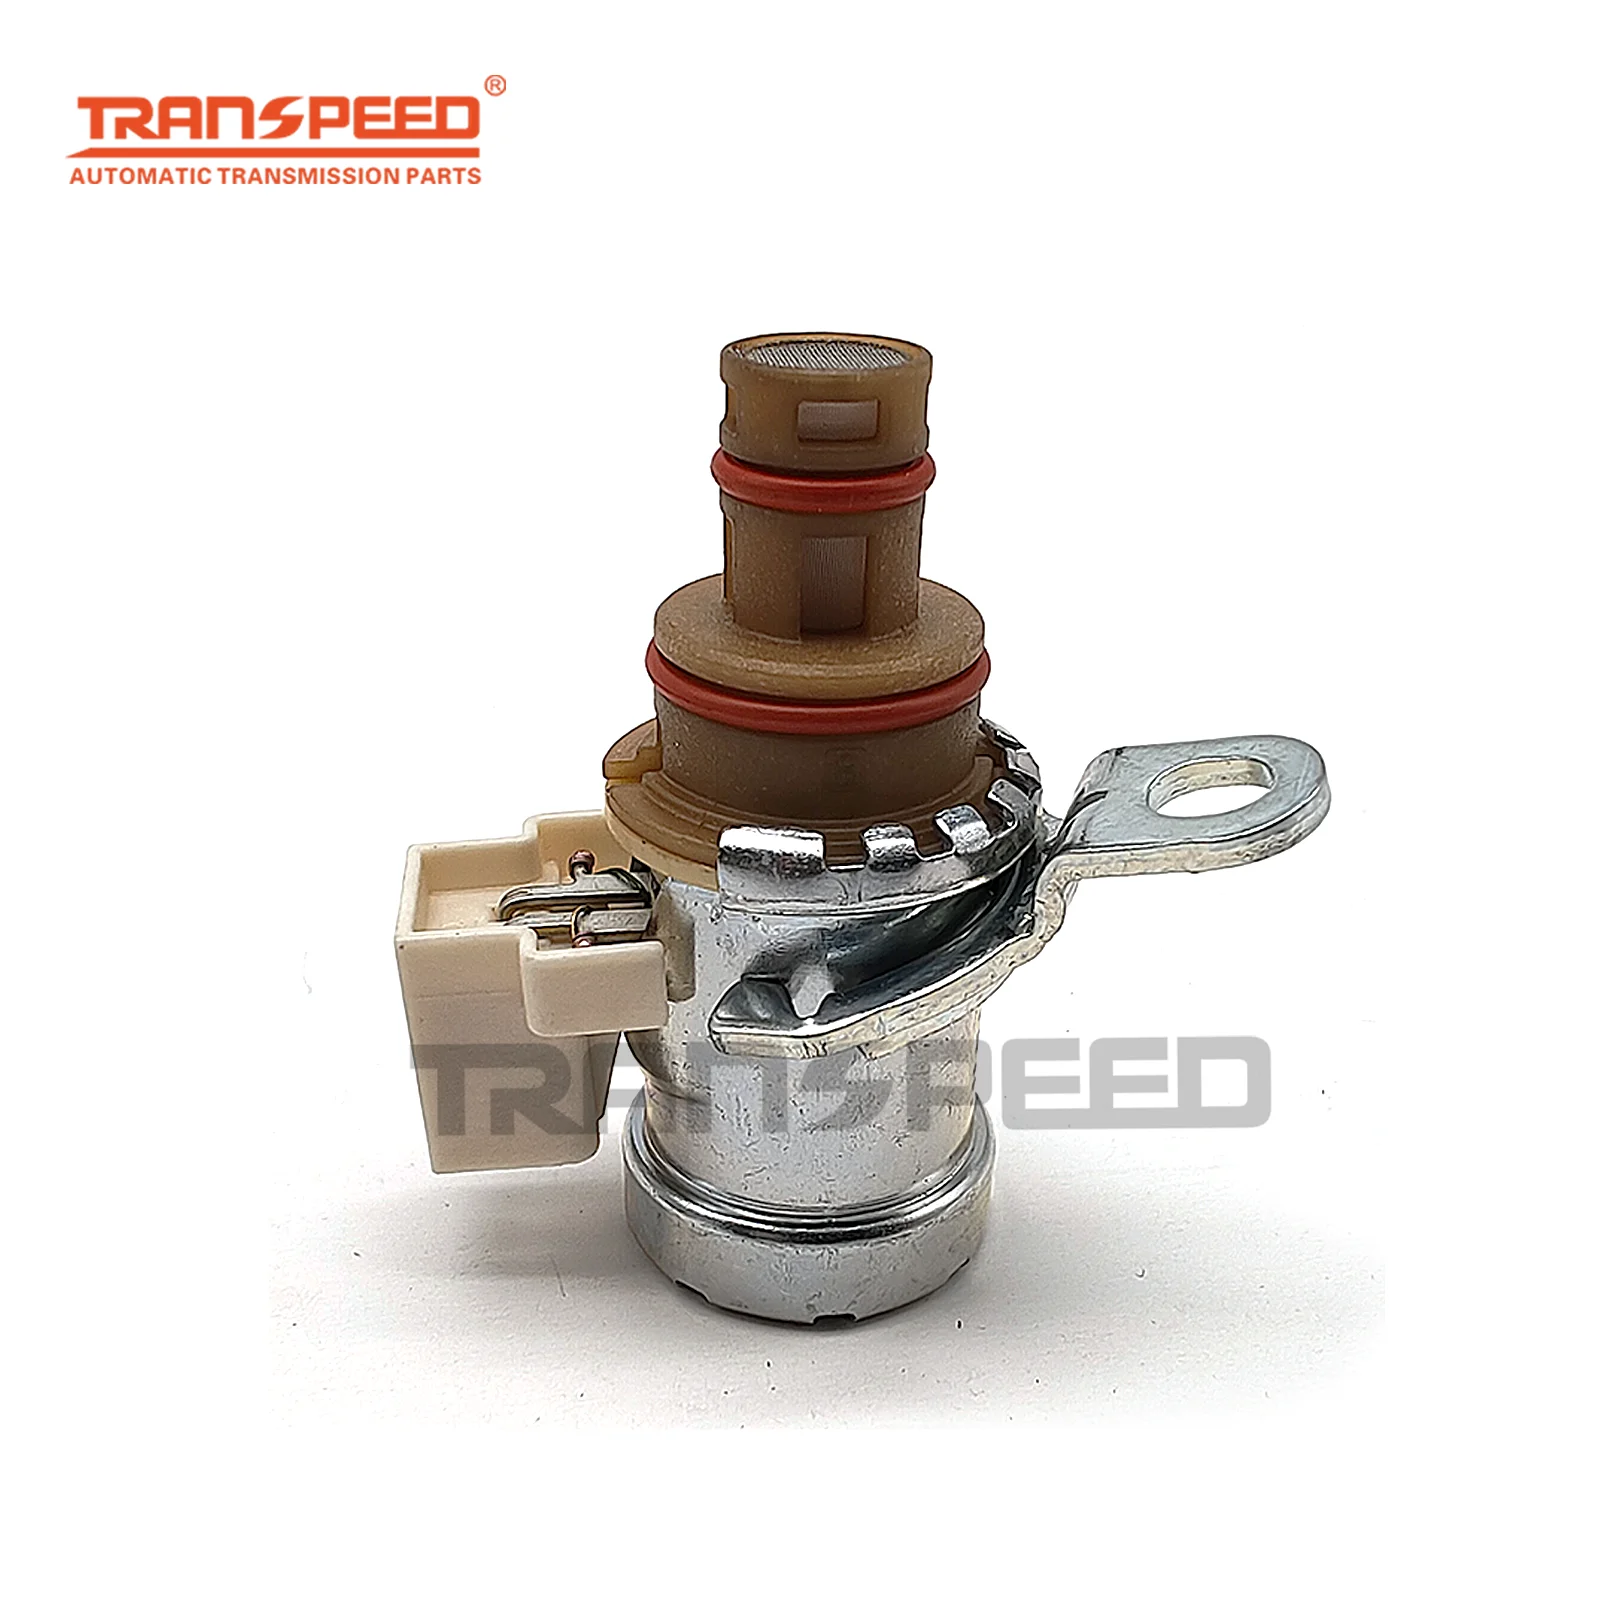 

TRANSPEED 62TE Auto Transmission Variable Force Solenoid 5169313AA For CHRYSLER DODGE AVENGER VW Automat Transmission